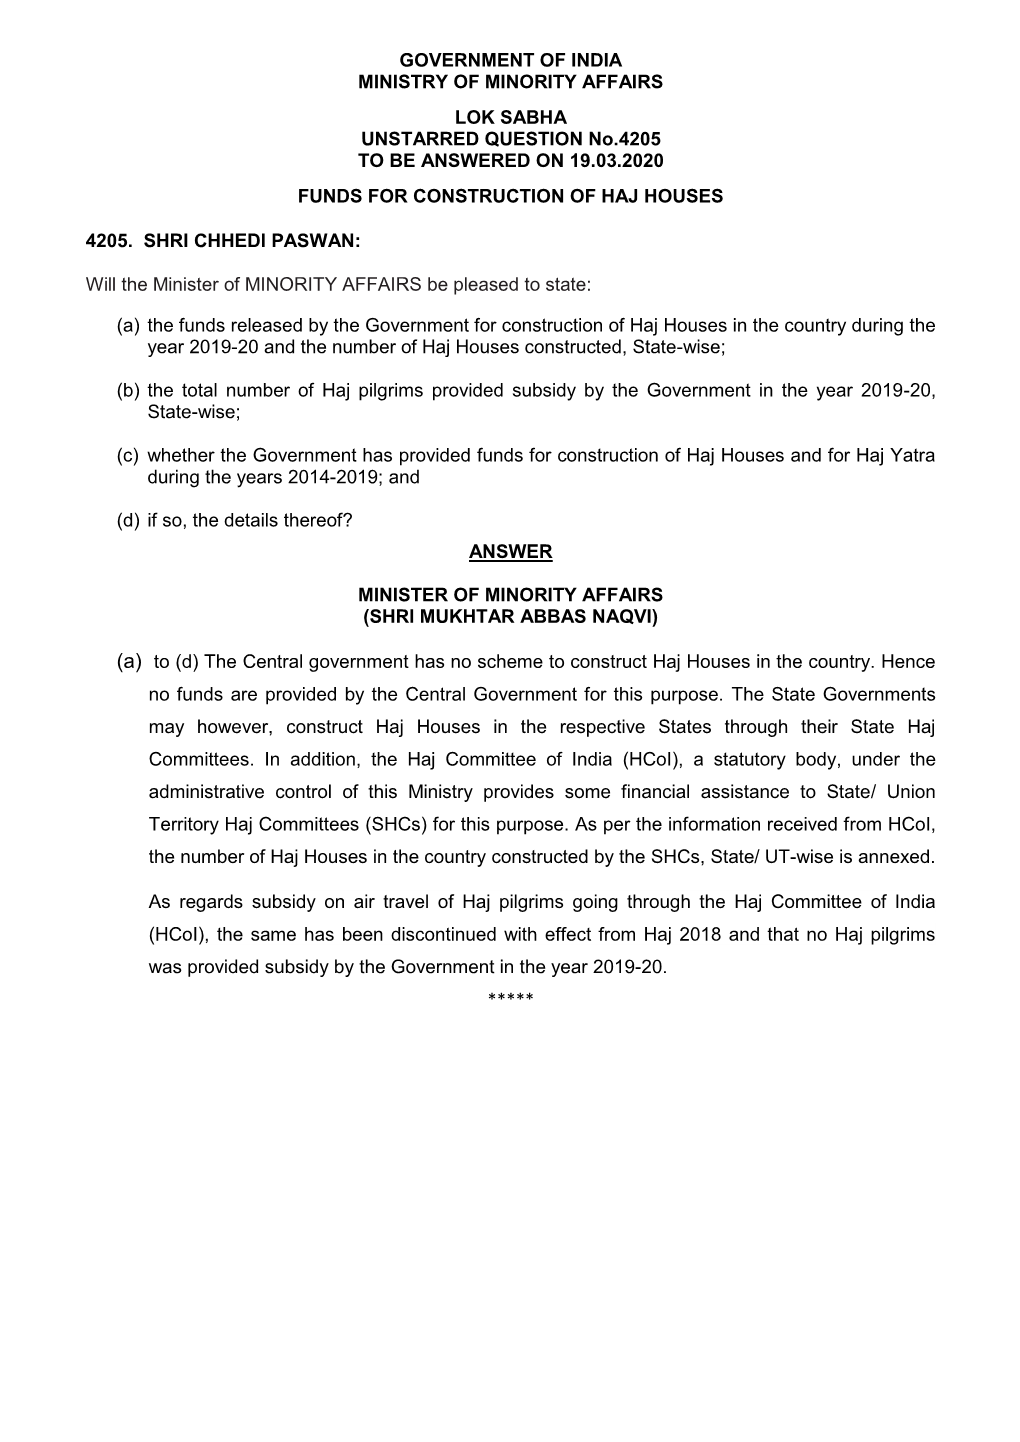 GOVERNMENT of INDIA MINISTRY of MINORITY AFFAIRS LOK SABHA UNSTARRED QUESTION No.4205 to BE ANSWERED on 19.03.2020 FUNDS FOR